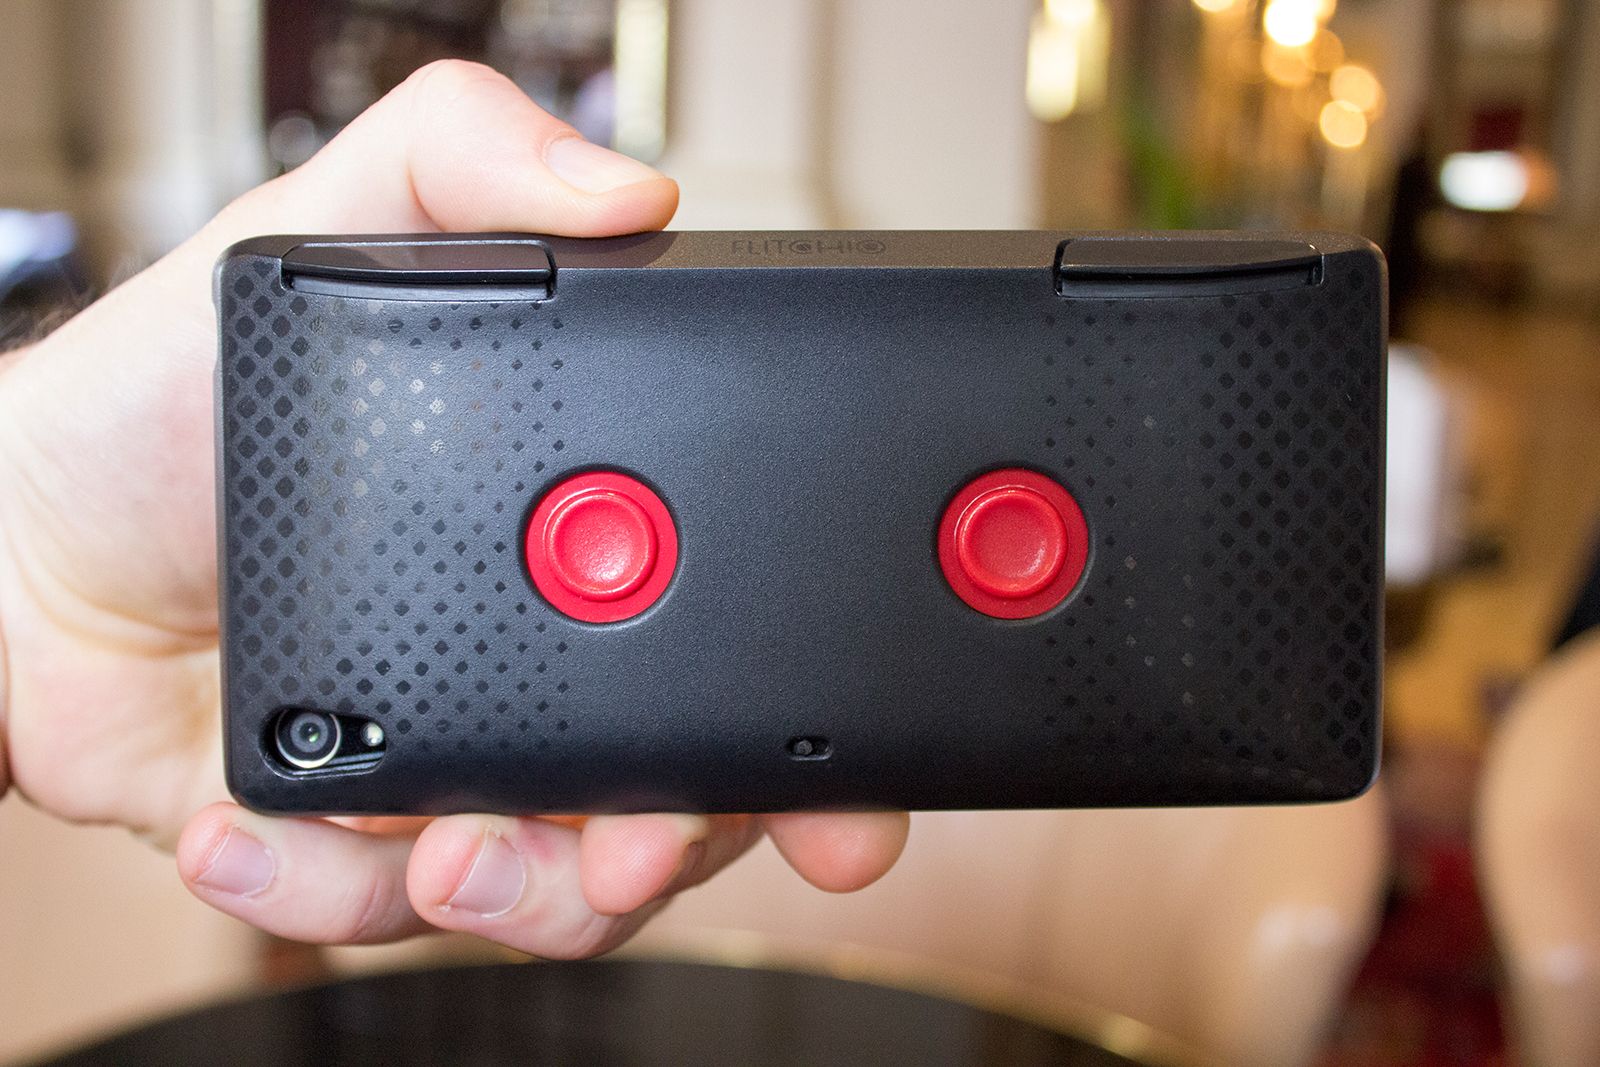 consoles beware flitchio android gaming controller case has you in its sights hands on  image 1